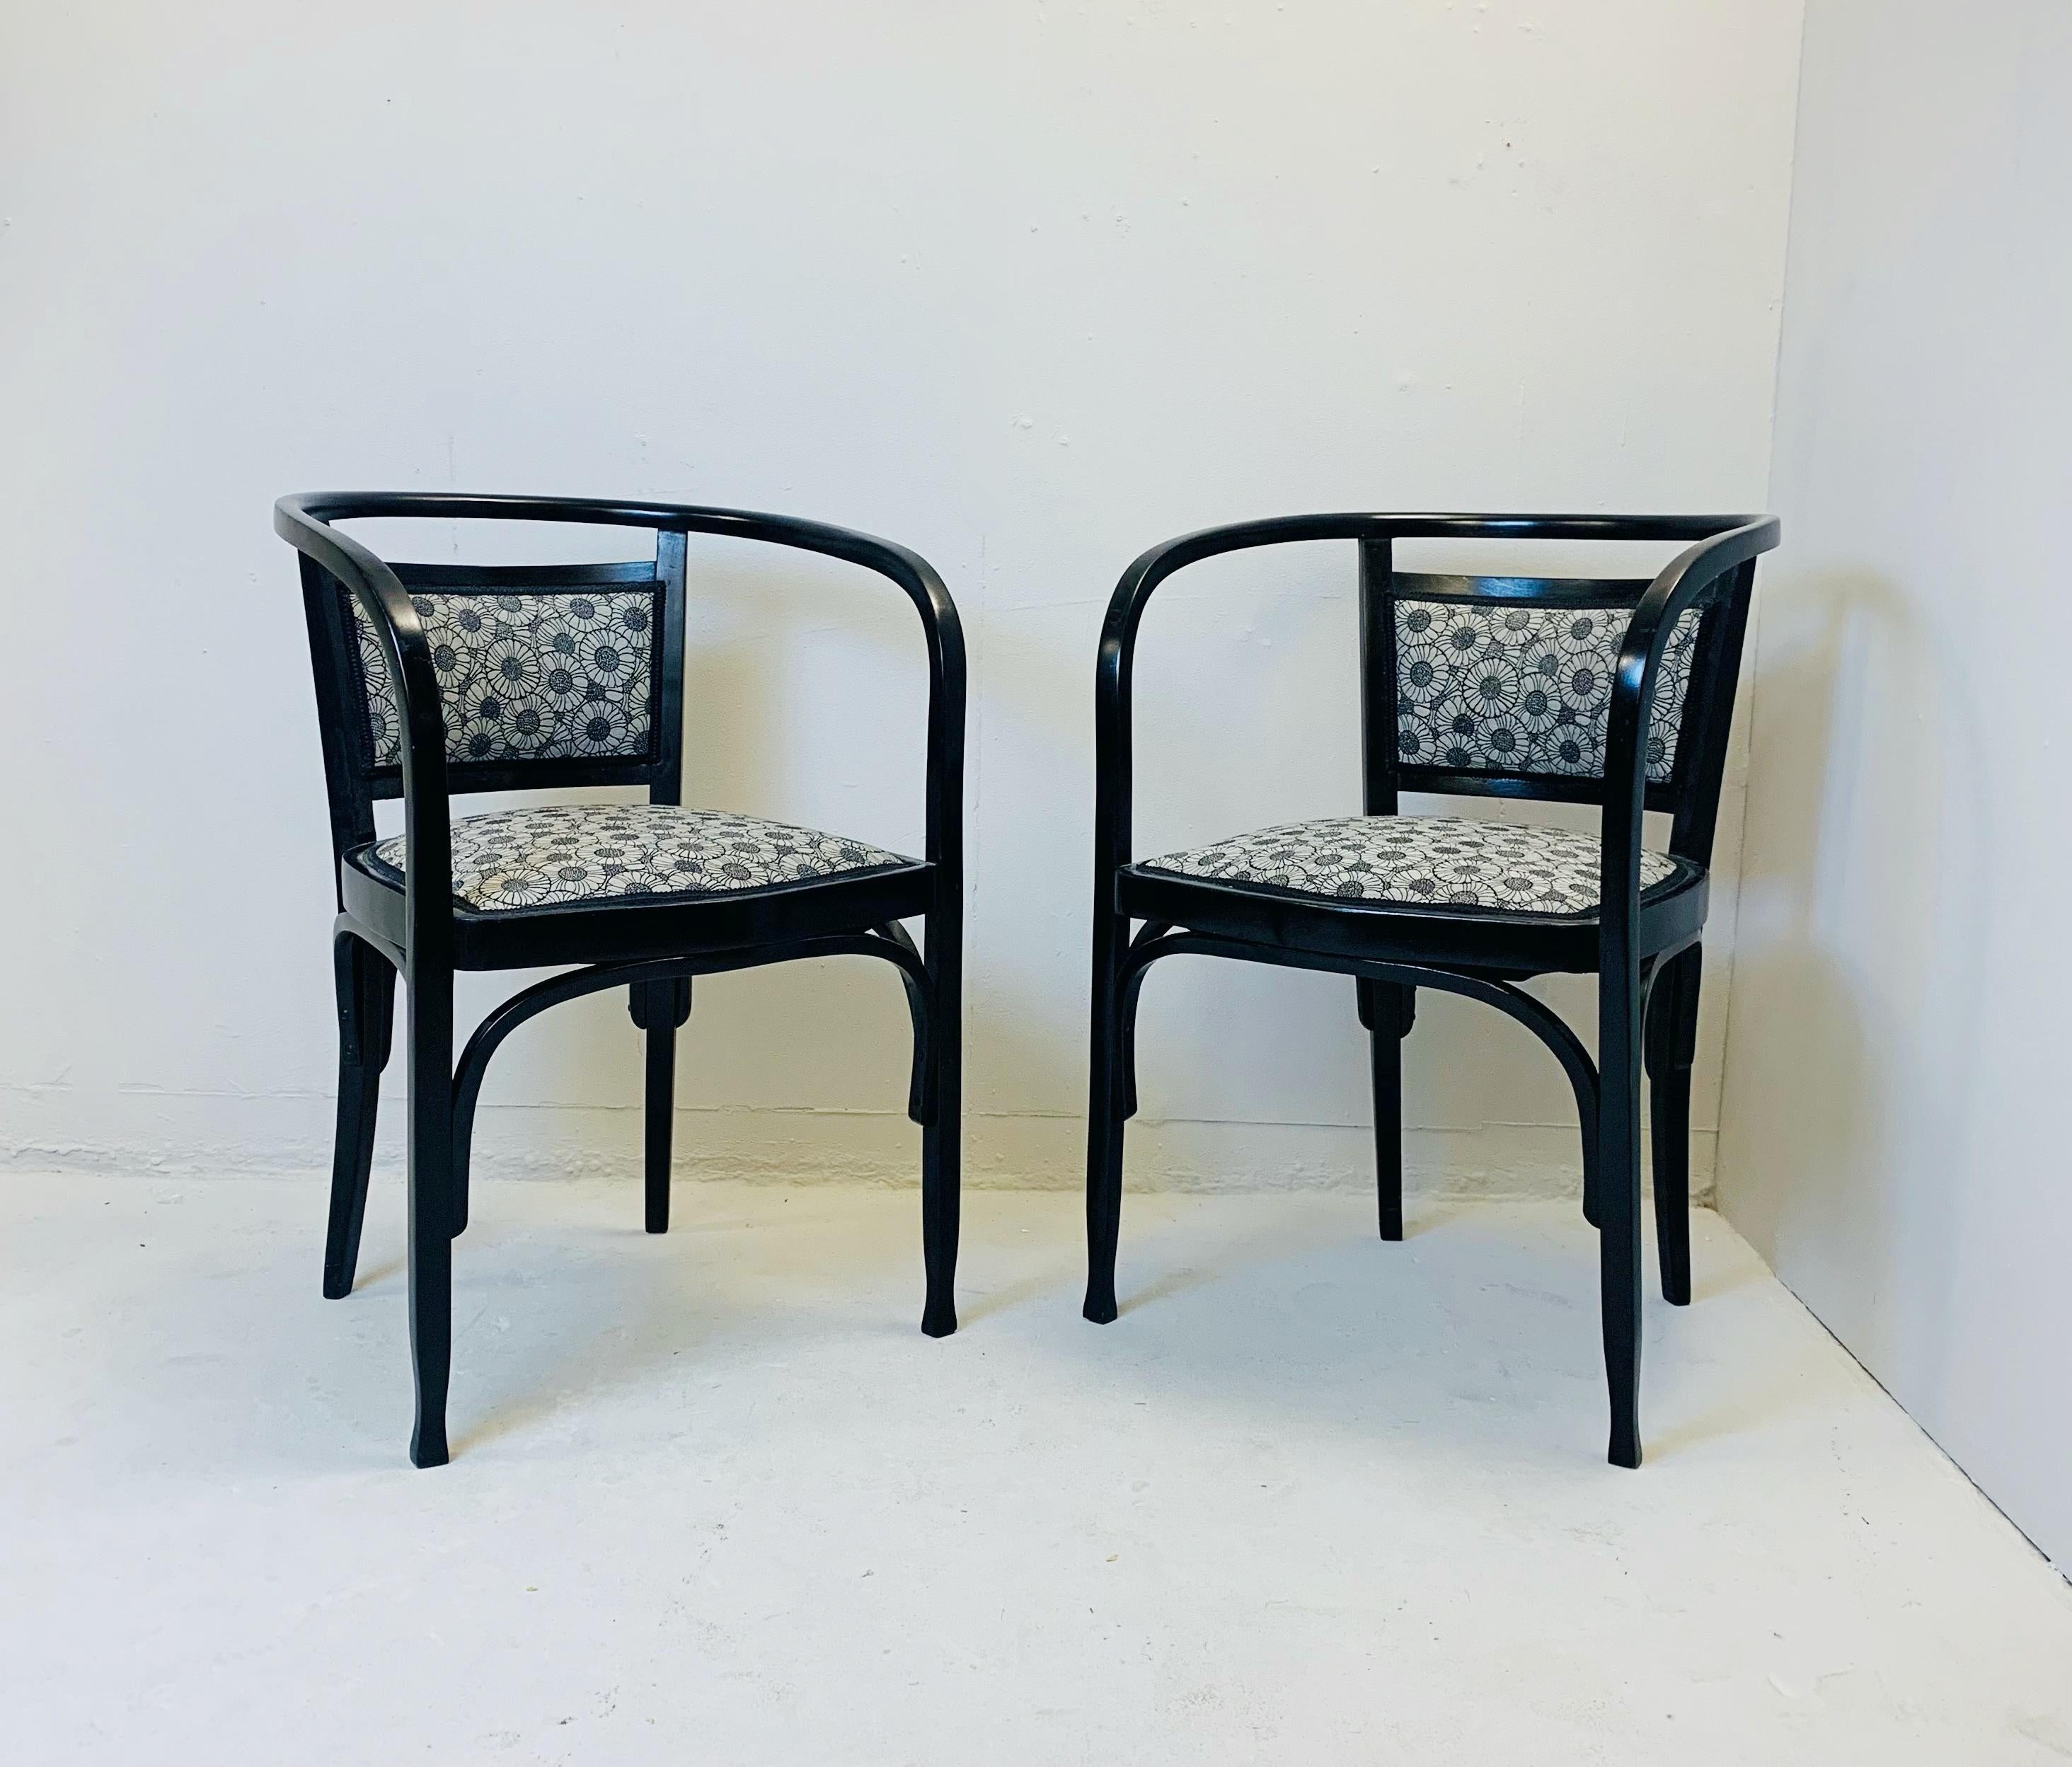 Pair of armchairs by Otto Wagner.